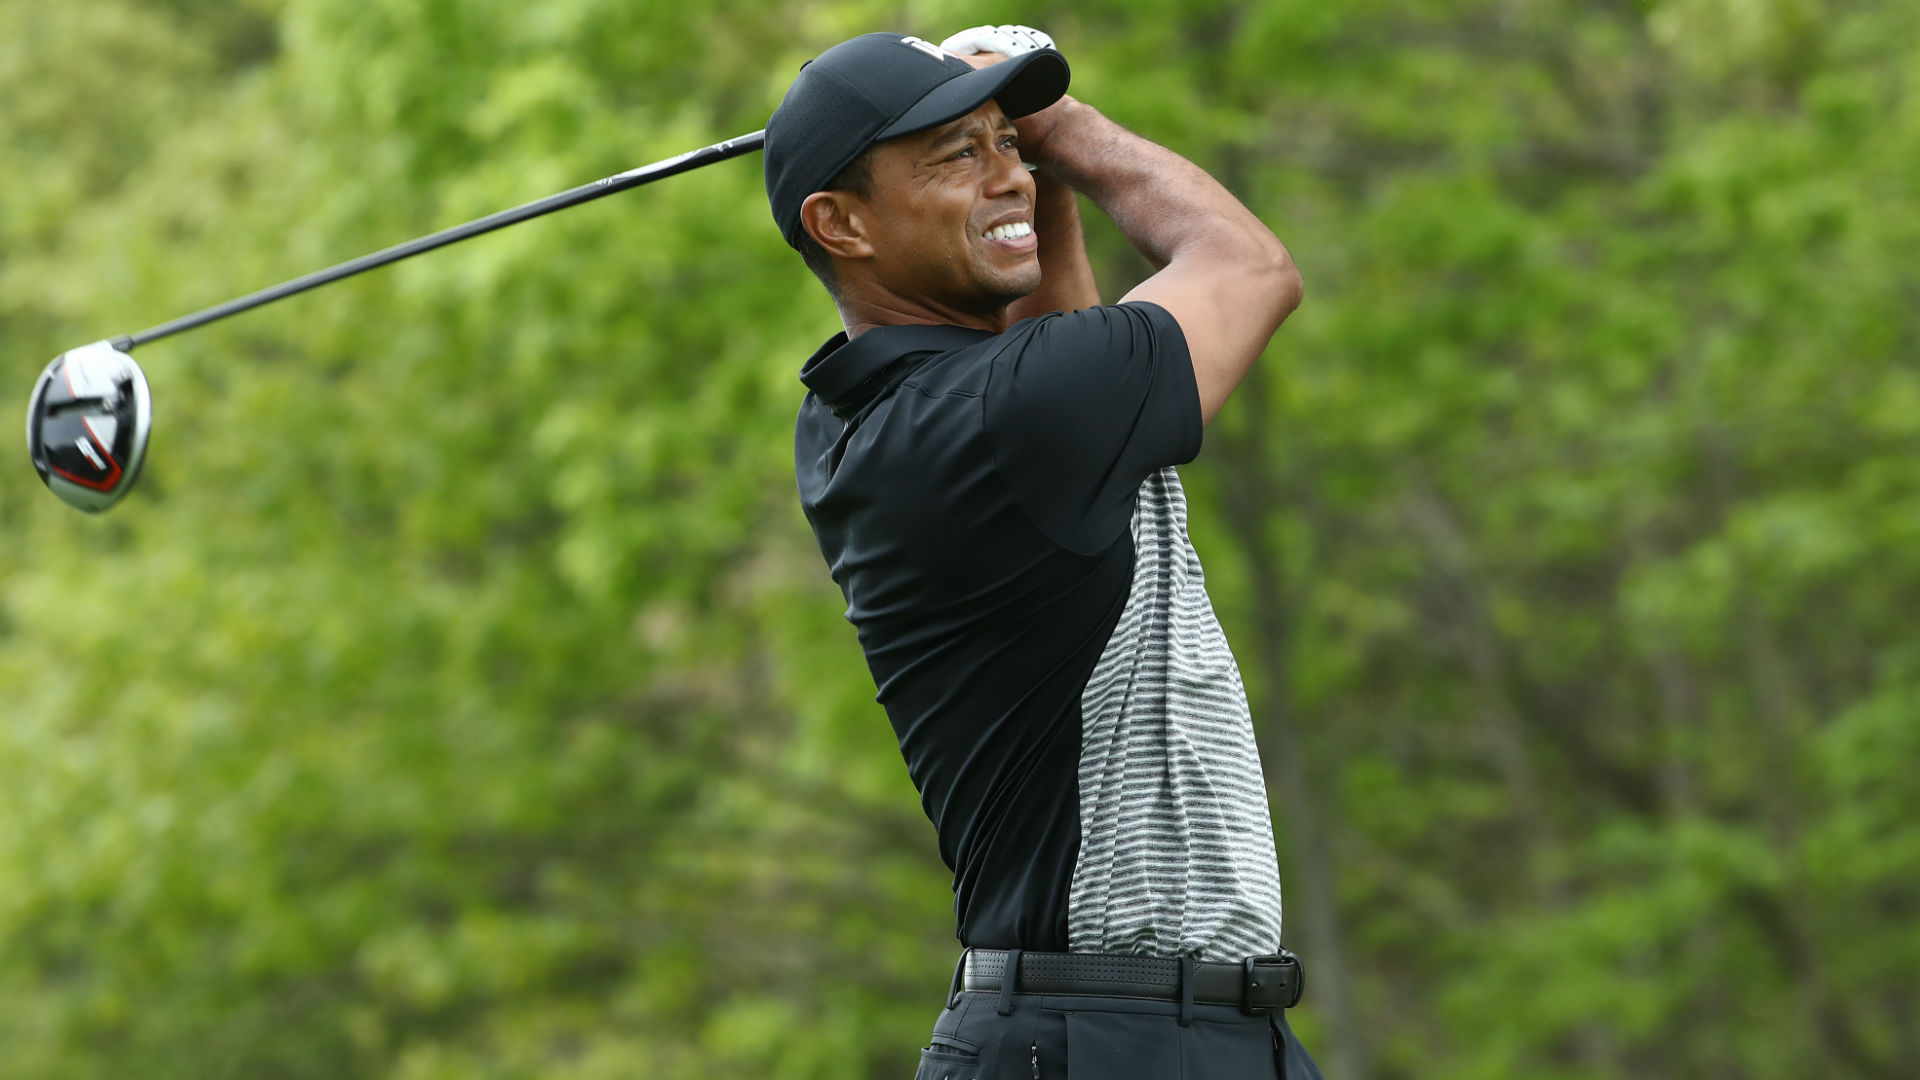 Tiger Woods' score: Round 2 results, highlights from 2019 PGA Championship | Sporting News